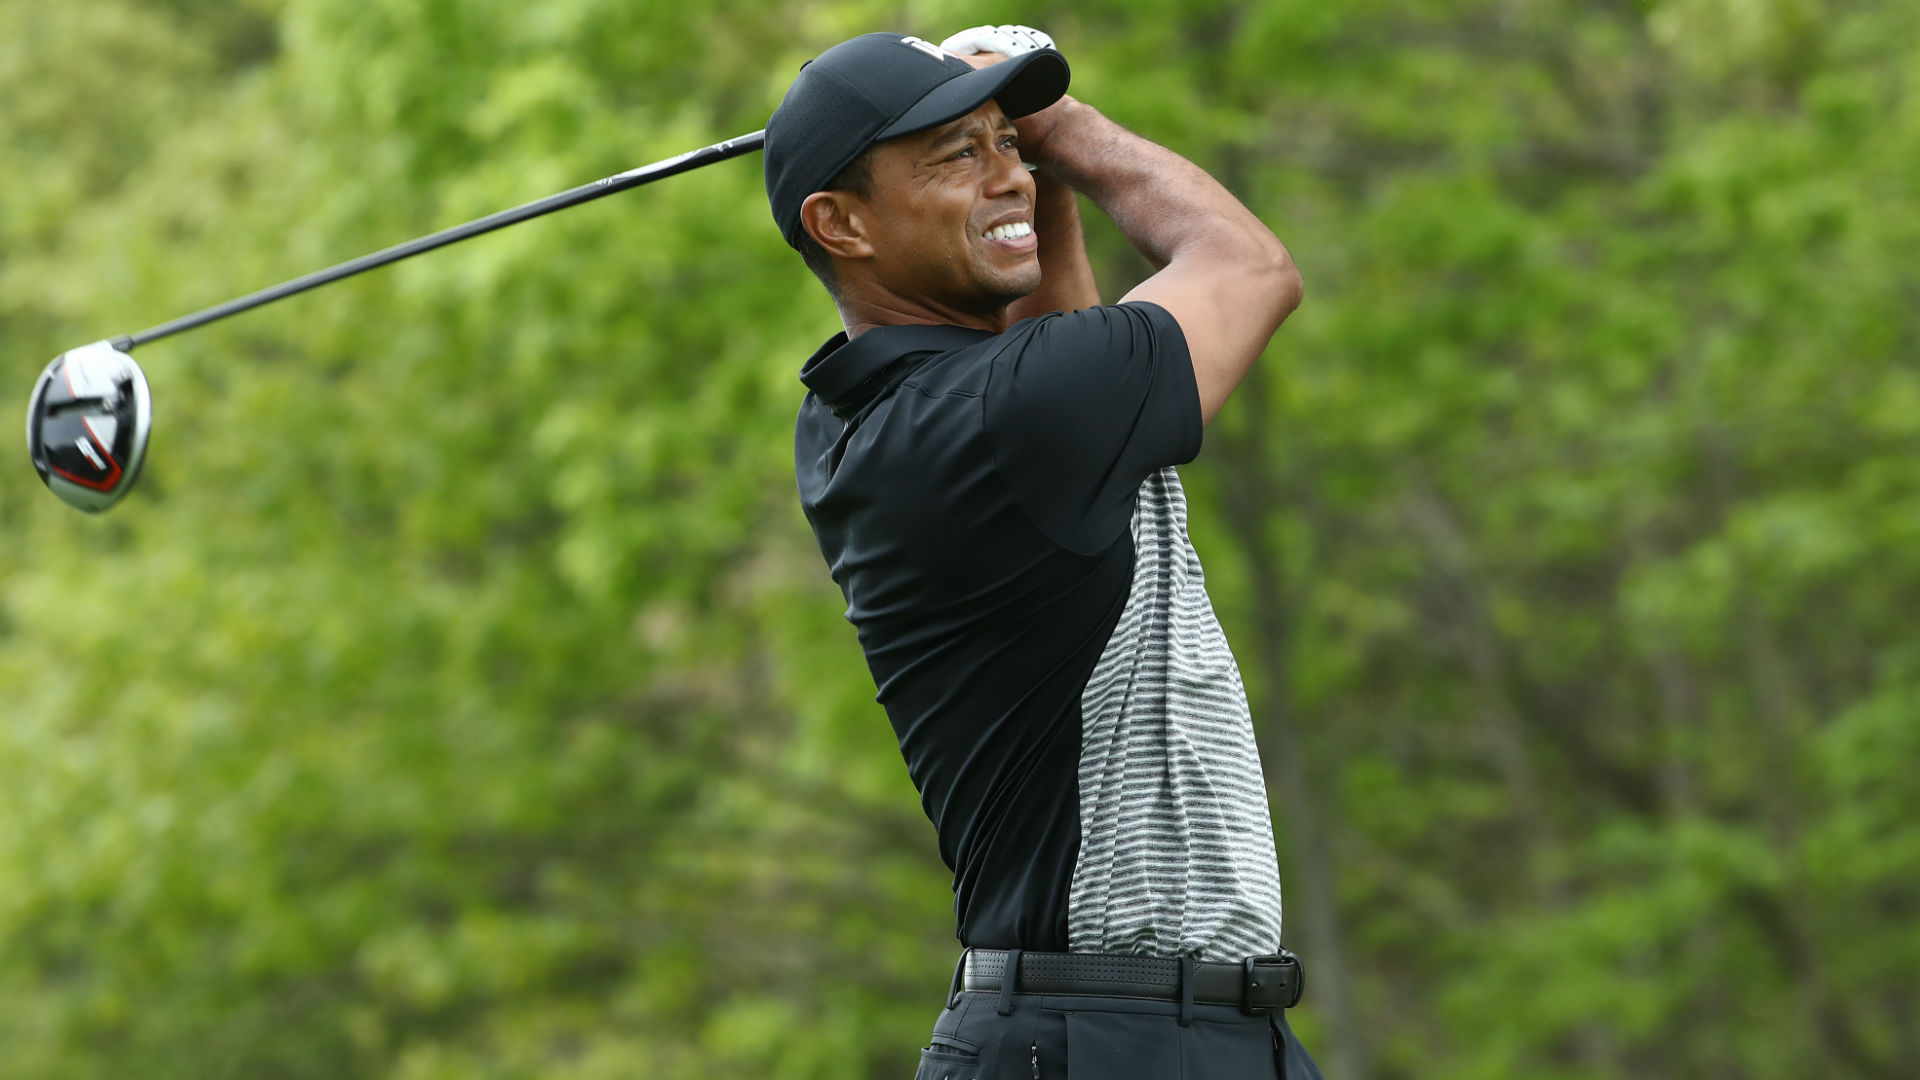 Tiger Woods' score: Round 2 results, highlights from 2019 PGA Championship | Sporting News